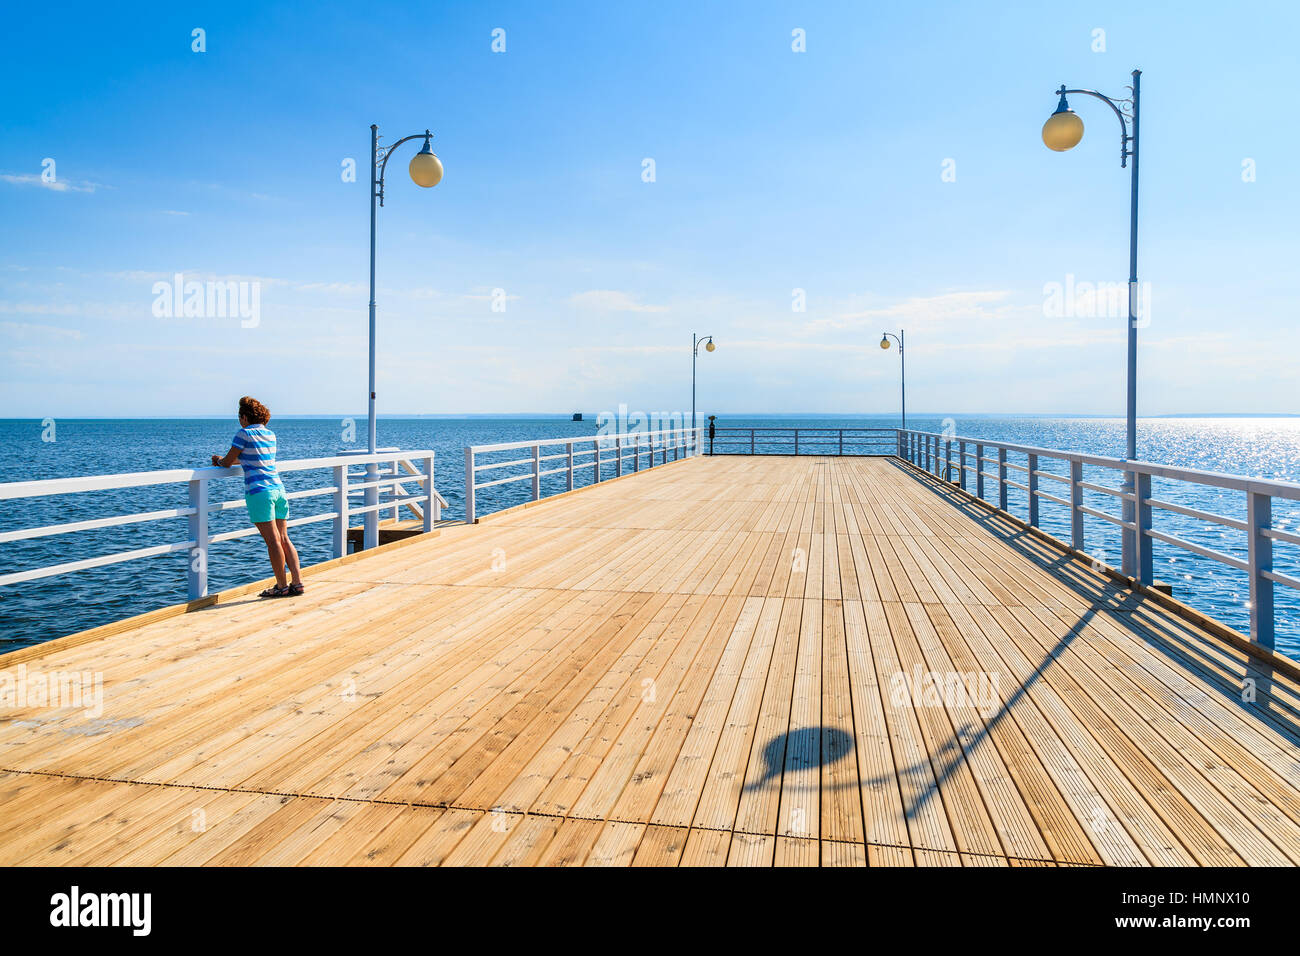 Wooden pier and young woman standing against railing in distance in Jurata town on coast of Baltic Sea, Poland Stock Photo